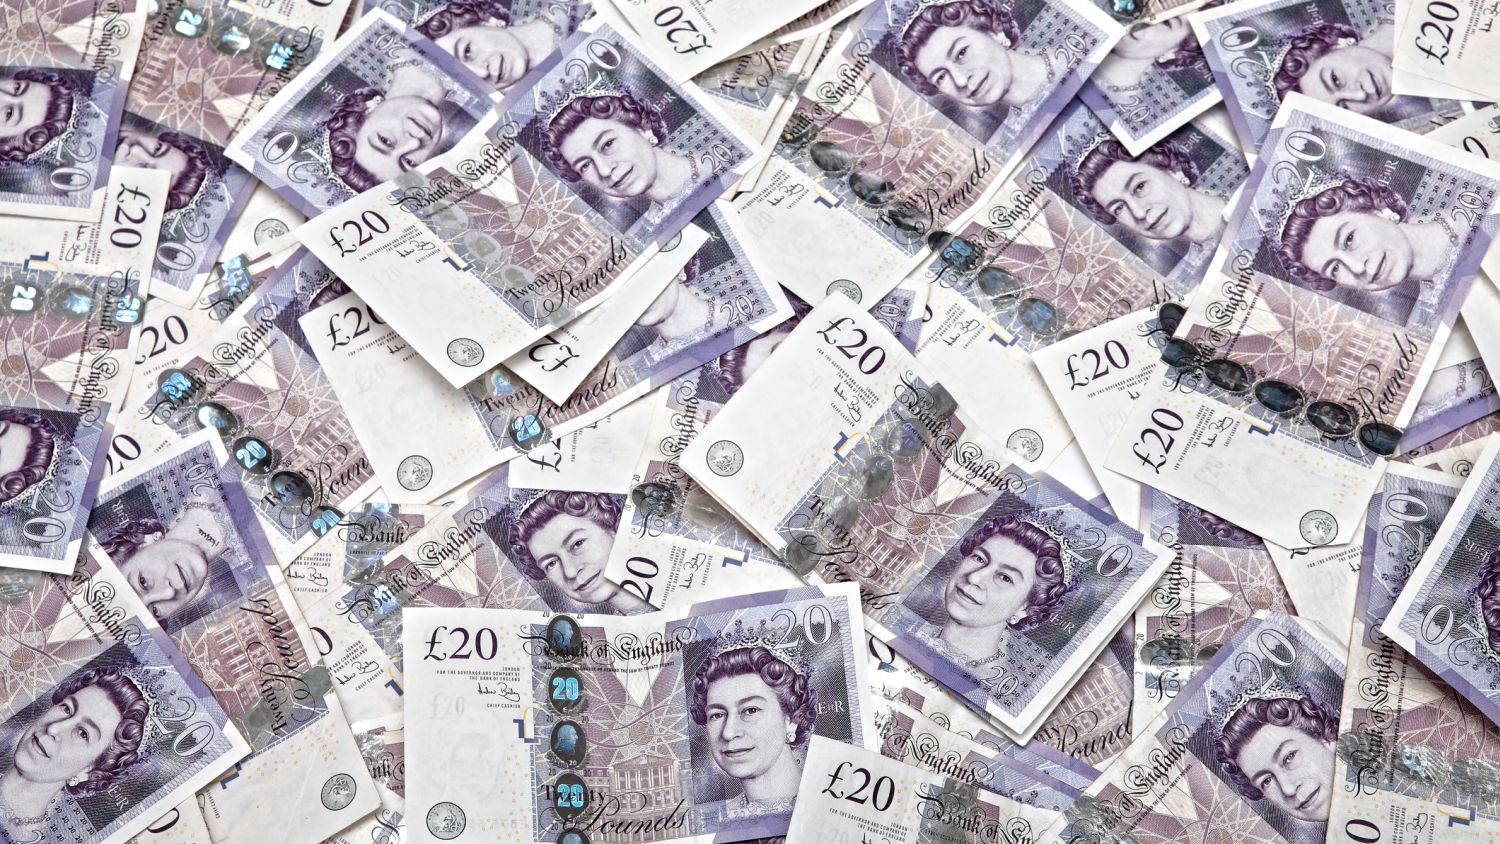 A collection of £20 notes (Image: Dreamstime)